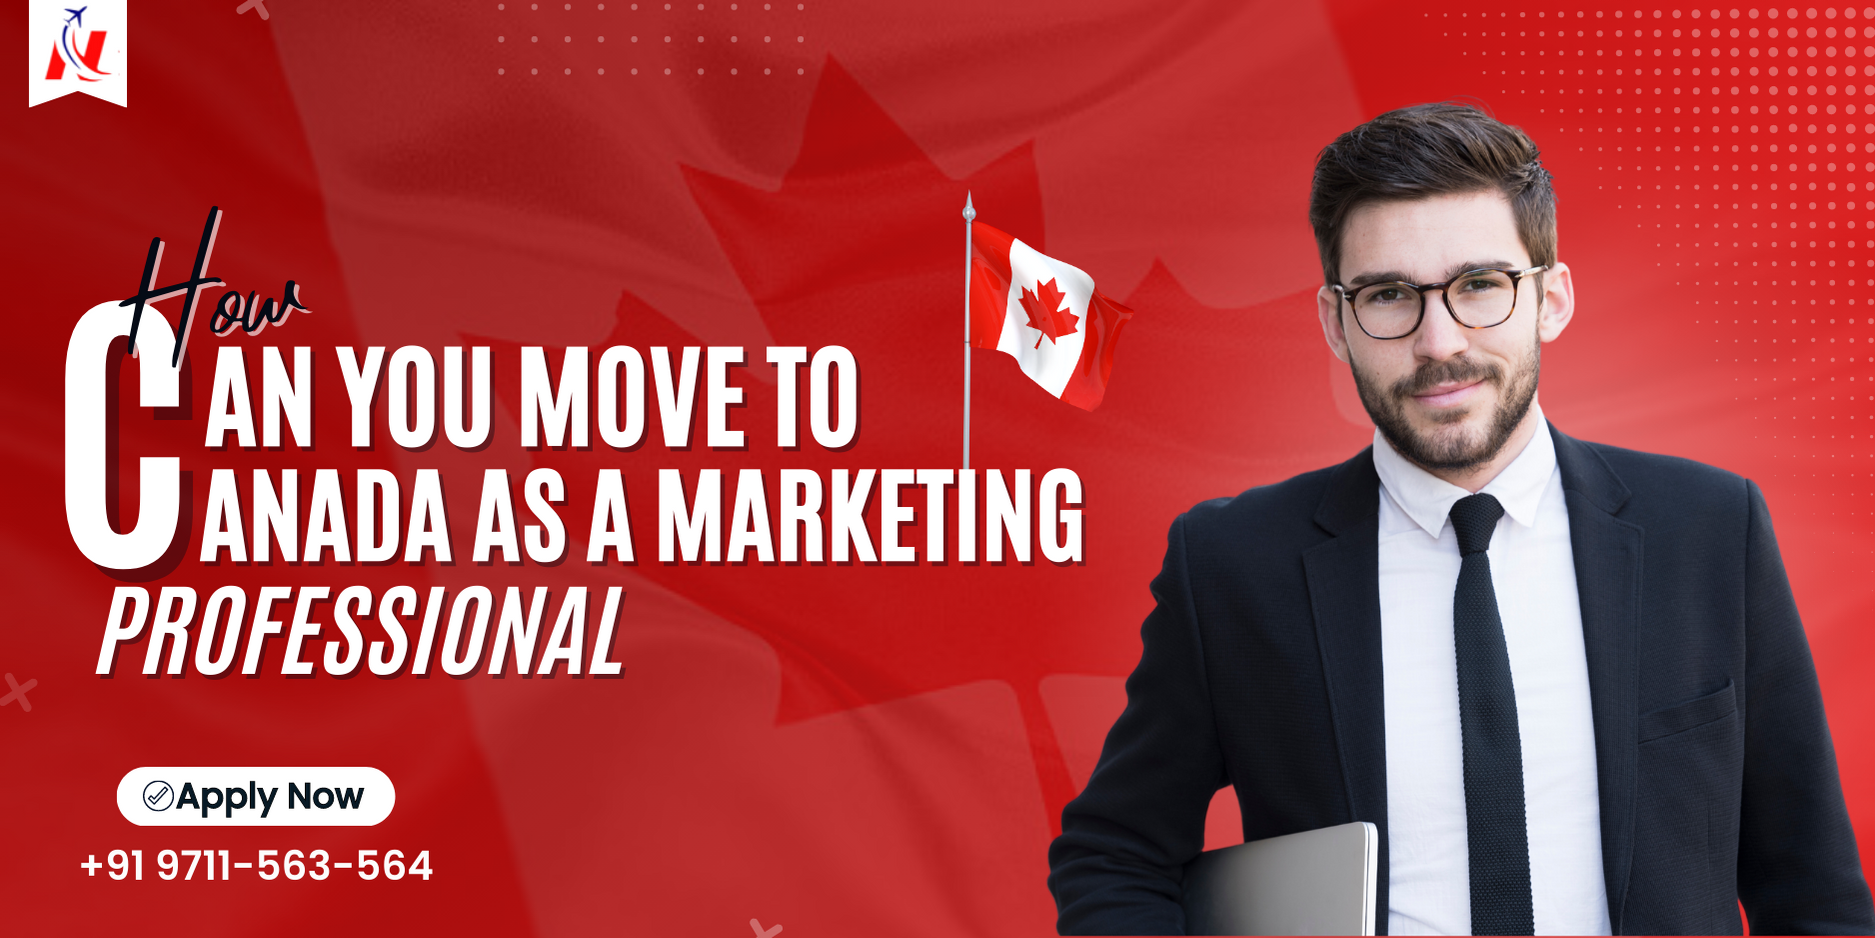 How can you move to Canada as a Marketing Professional?